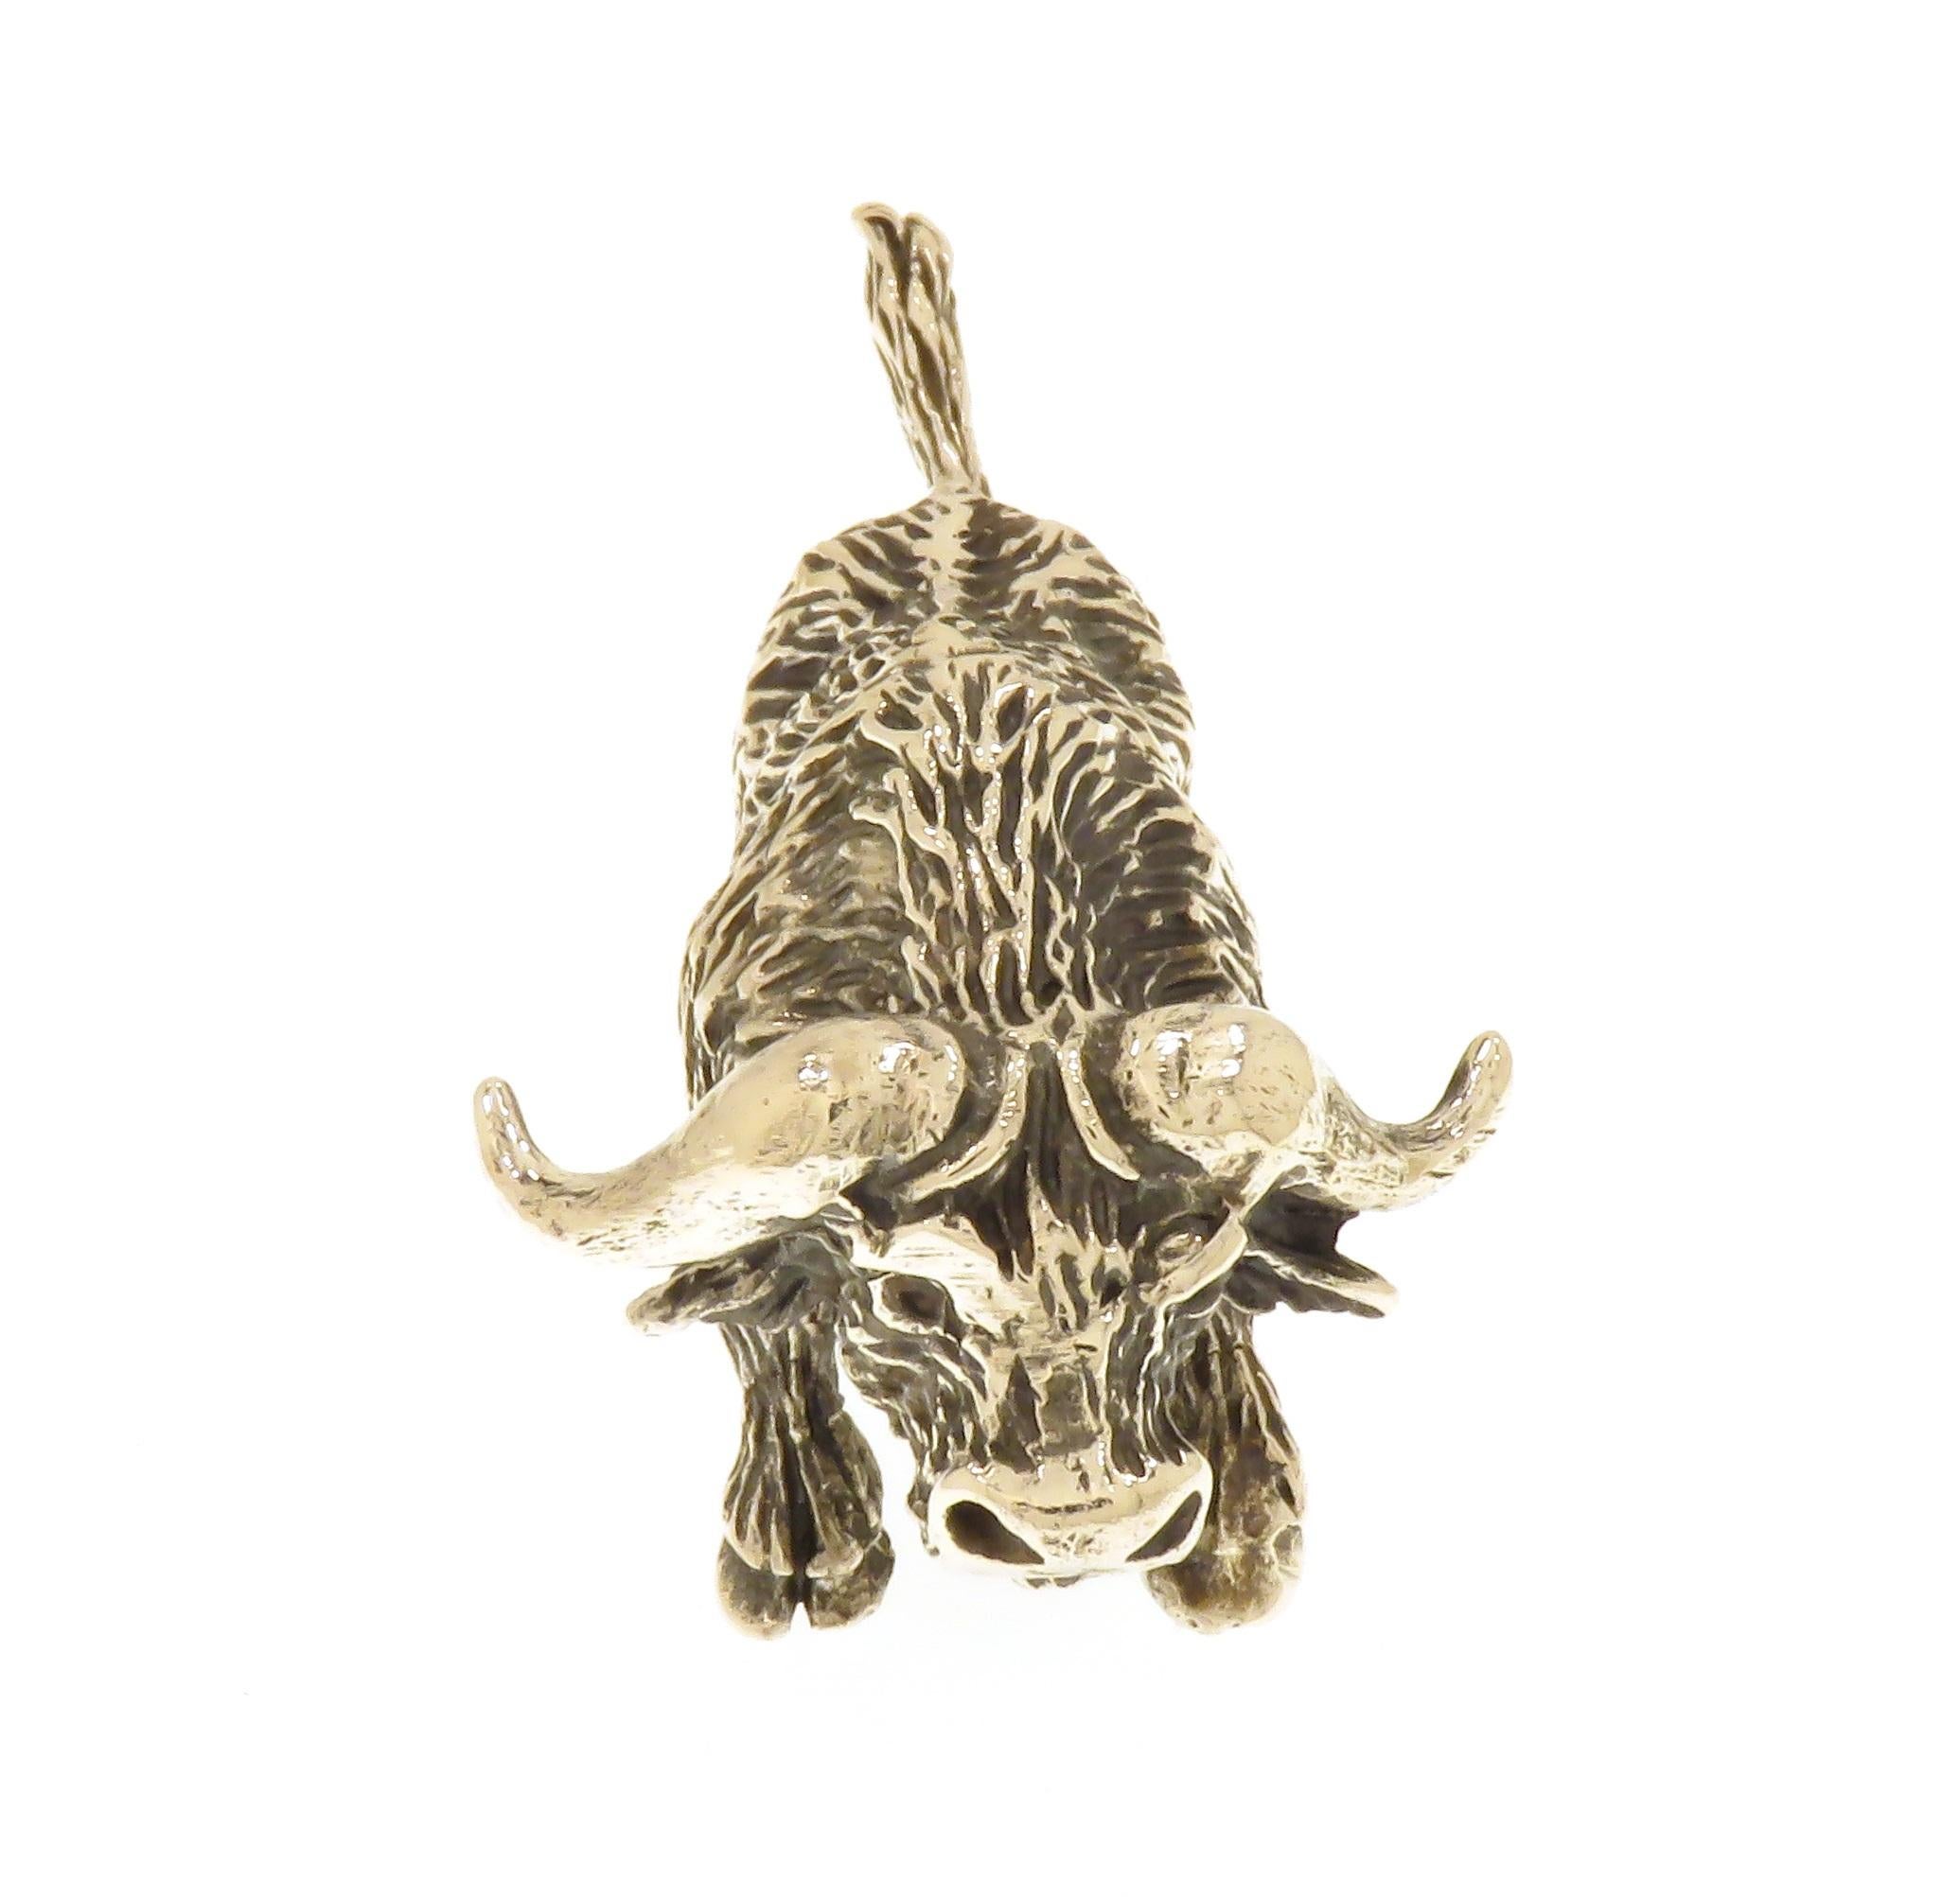 Solid silver buffalo figurine very good vintage condition.
Dimensions: Height 24 mm / 0.944 inches - Length 50 mm / 1.968 inches - Weight 27 grams.
It  is stamped with the Silver Italian Mark 800 and Italian Brandmark 100AR.

Hancrafted in: silver